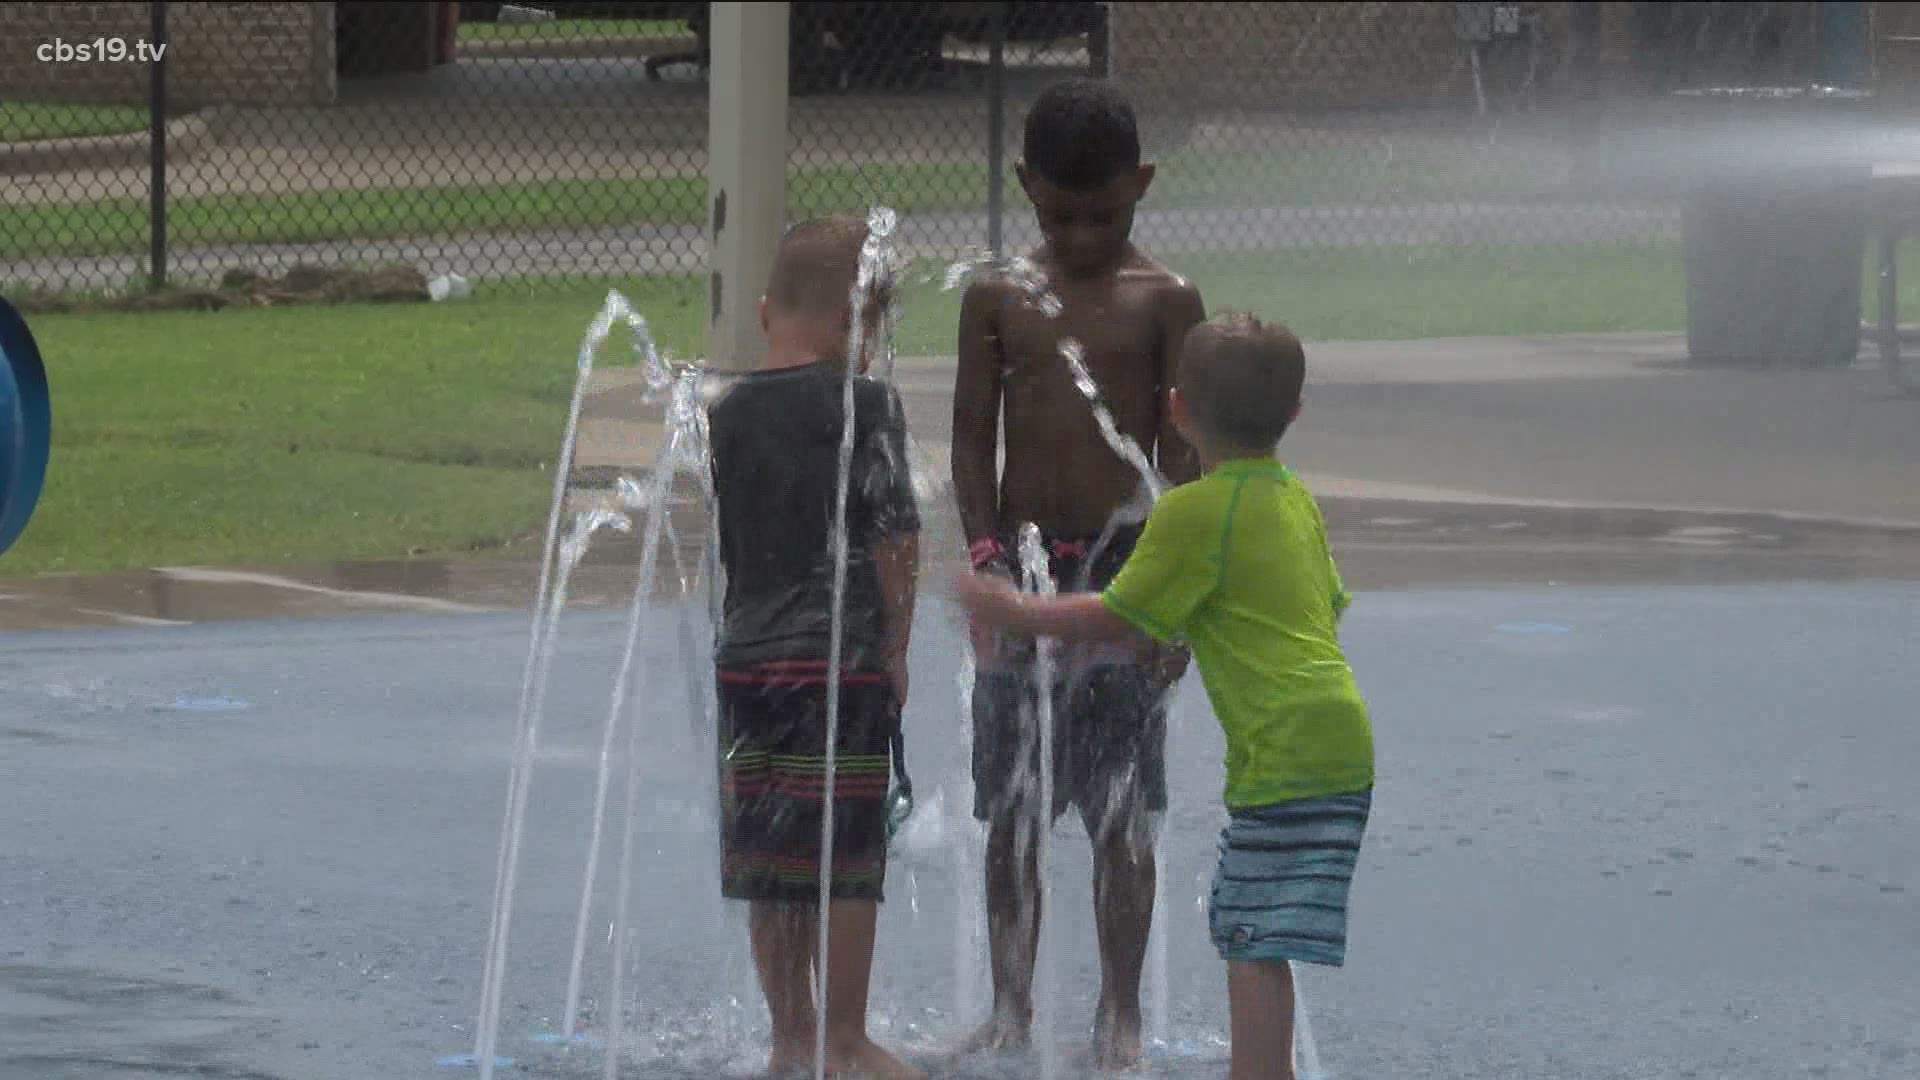 Tips to help both parents and kids stay cool for the summer.